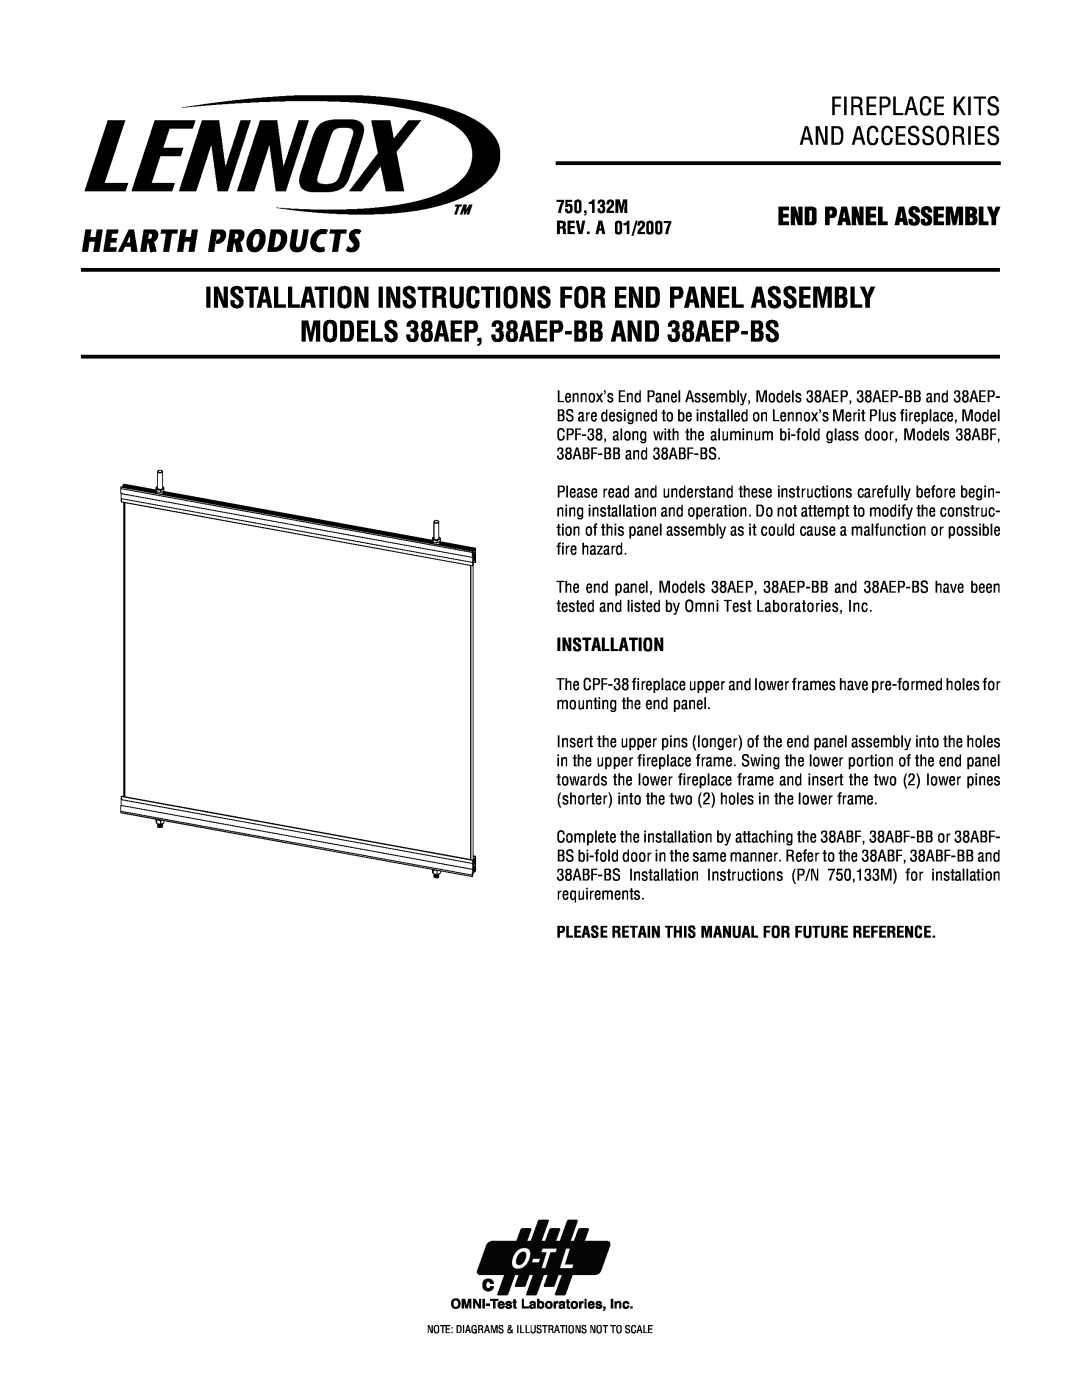 Lennox Hearth 38AEP-BS installation instructions Please Retain This Manual For Future Reference, End Panel Assembly 